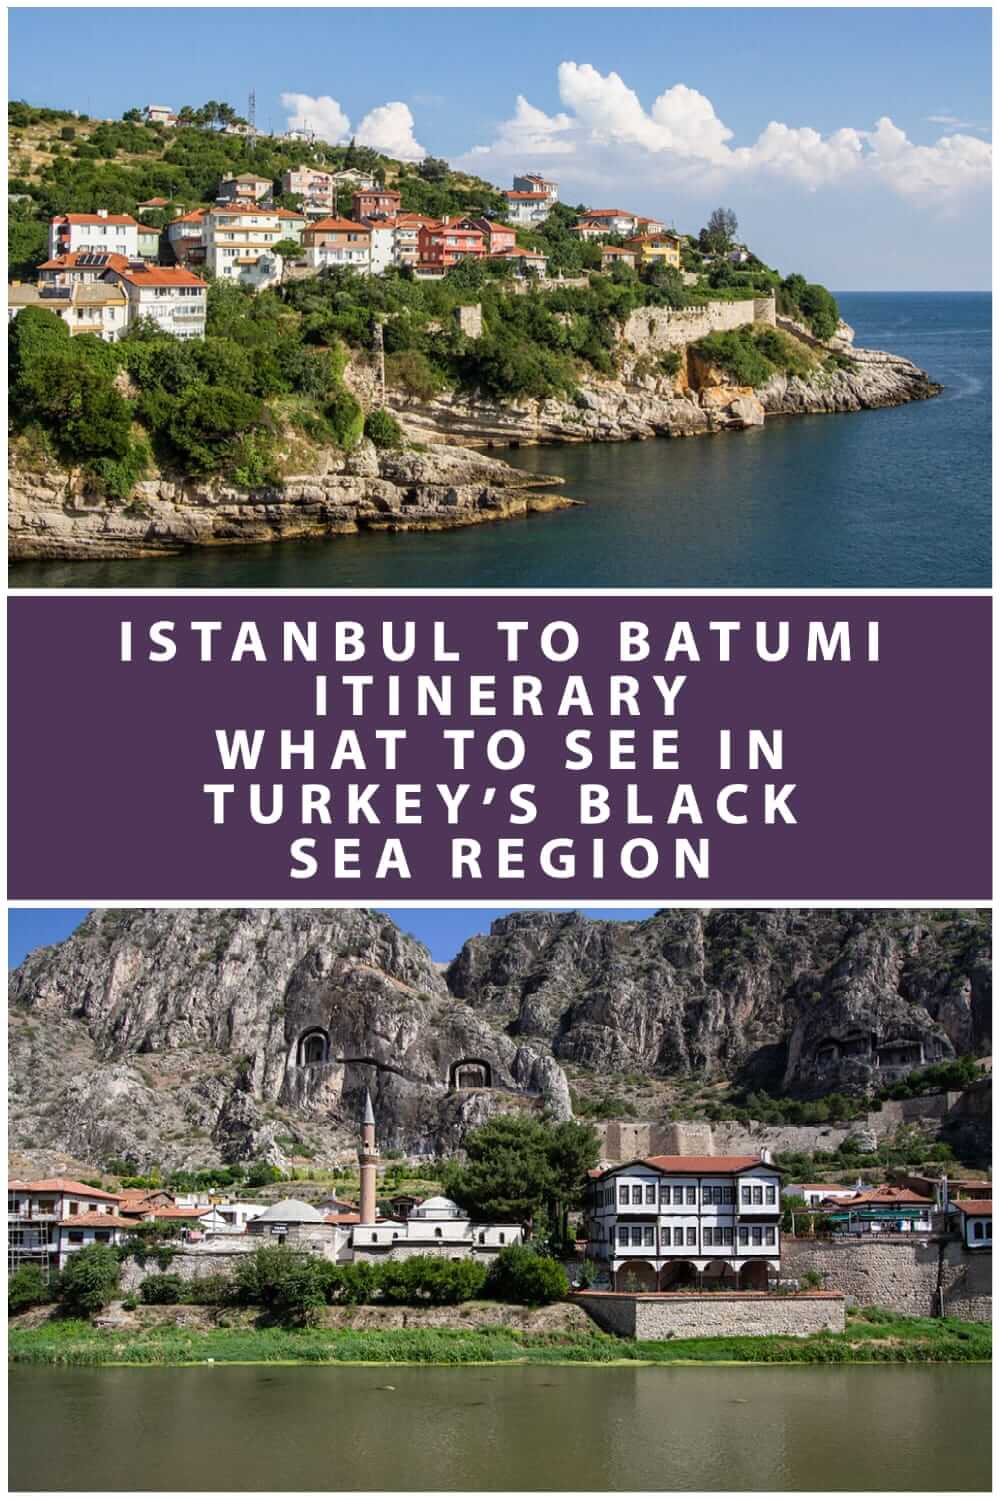 Istanbul to Batumi itinerary - Places to visit in the Black Sea region of Turkey #travelplanning #europe